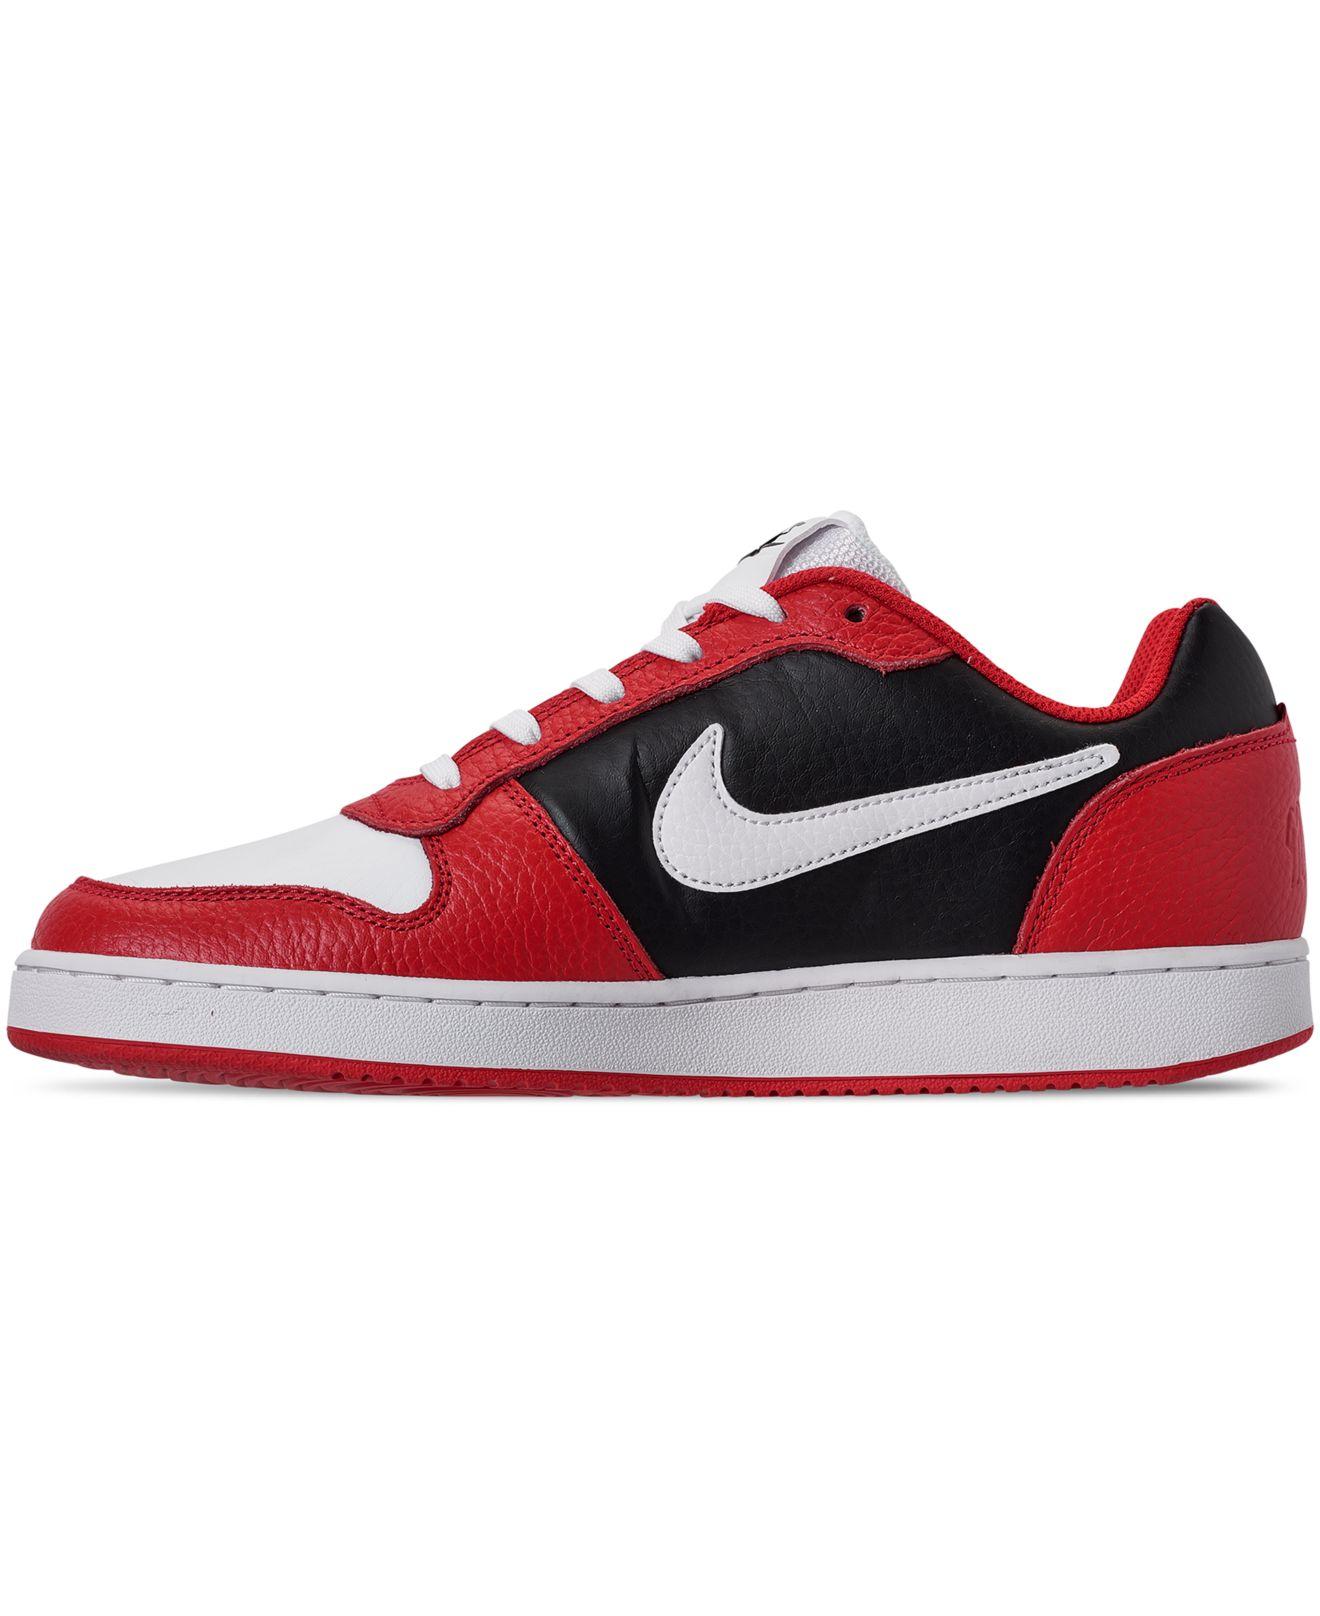 Nike Leather Ebernon Low Premium Casual Sneakers From Finish Line in Red  for Men - Lyst